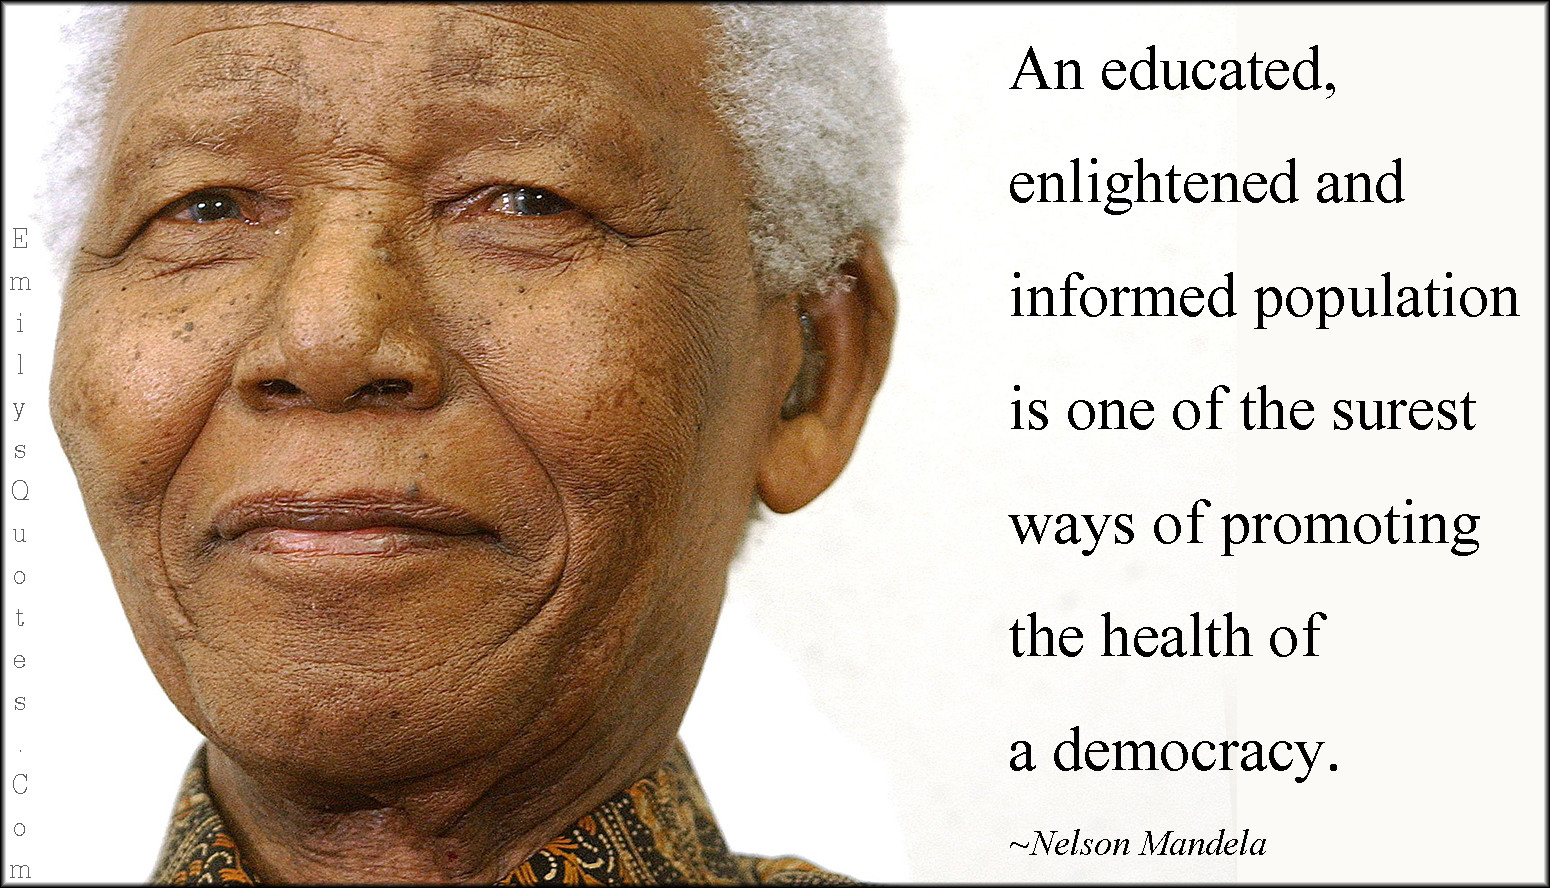 Nelson Mandela Quotes Education
 An educated enlightened and informed population is one of